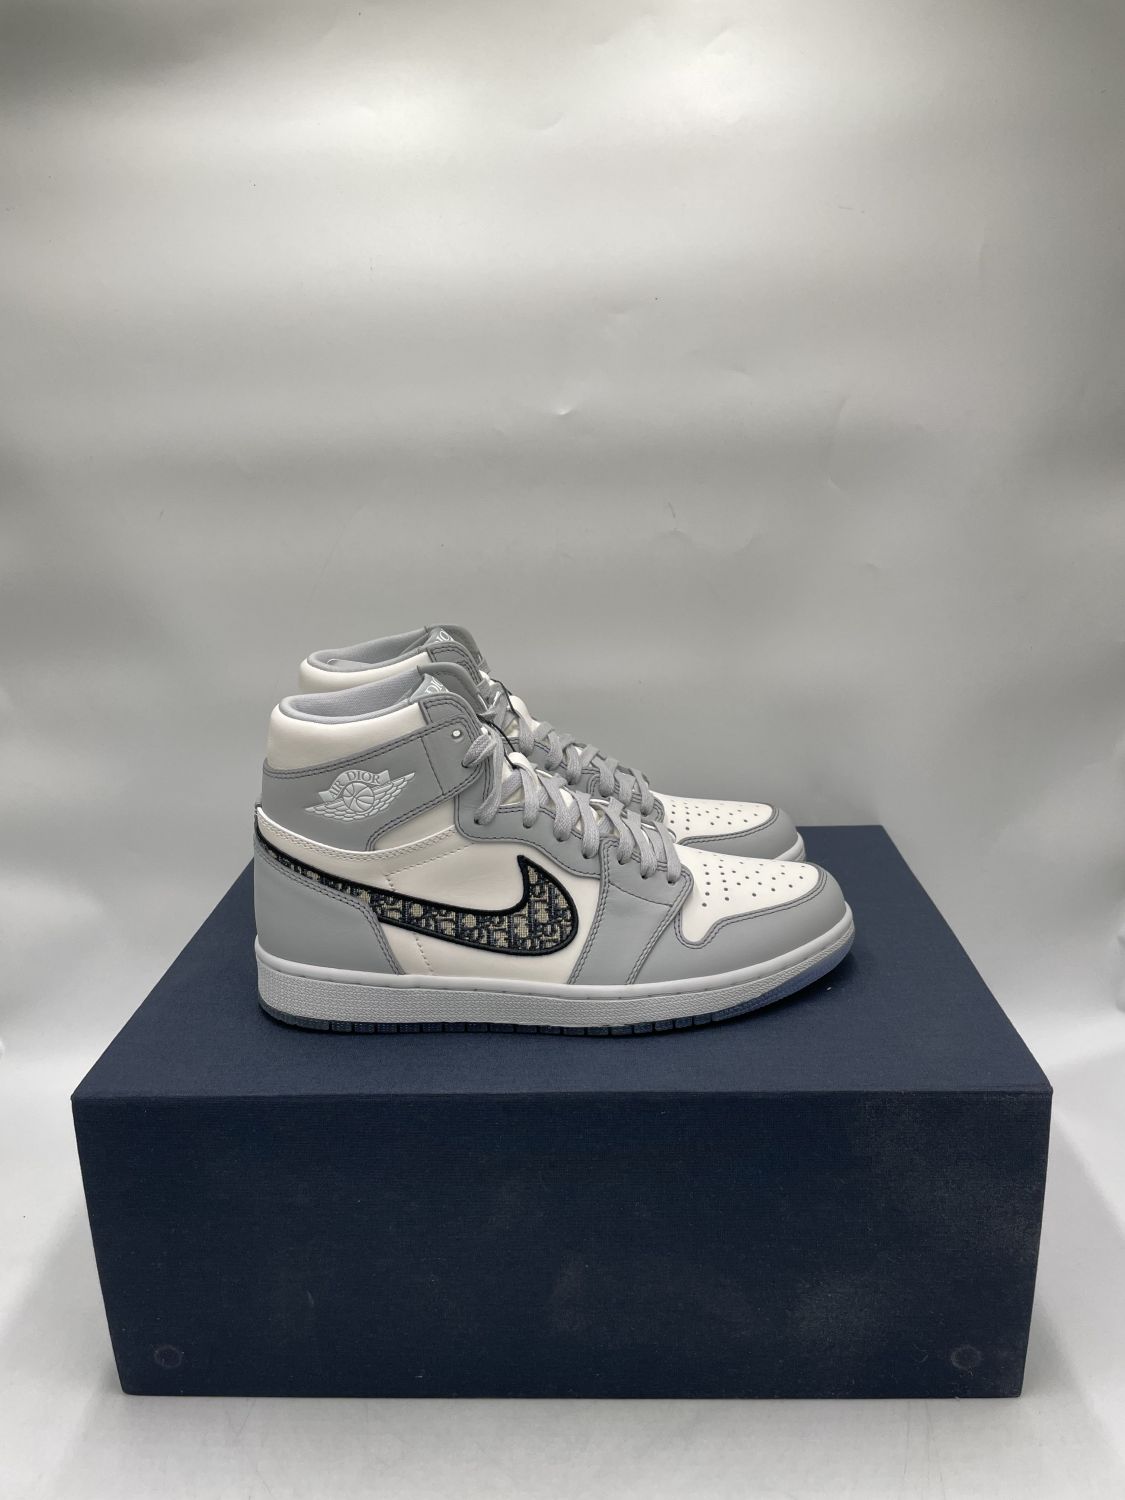 Jordan 1 Retro High Dior sneakers worth R250k leave Mzansi up in arms Is  there an extra digit  Brieflycoza